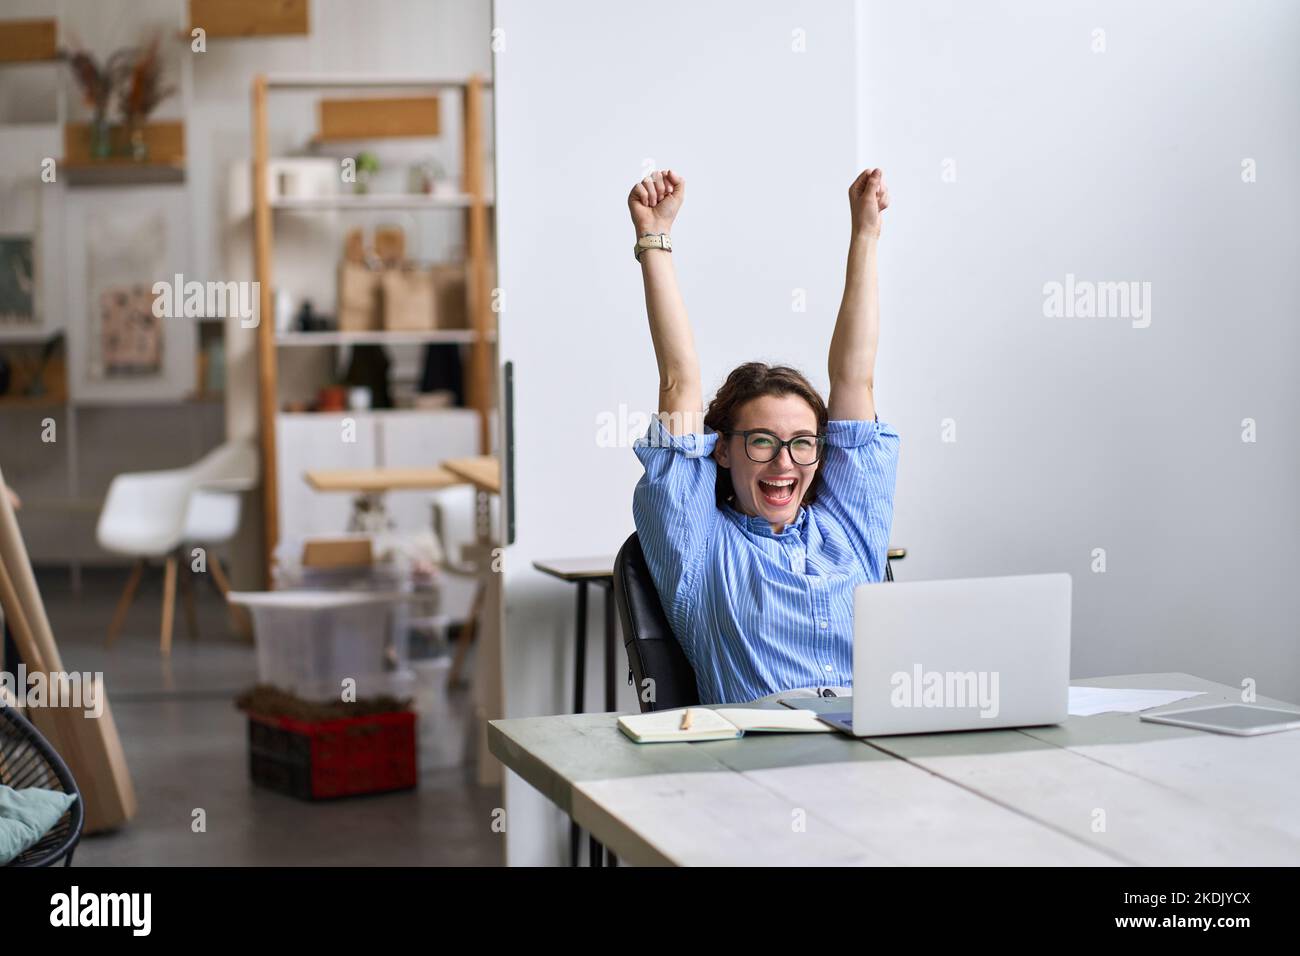 Happy excited young woman student or employee using laptop celebrating success. Stock Photo